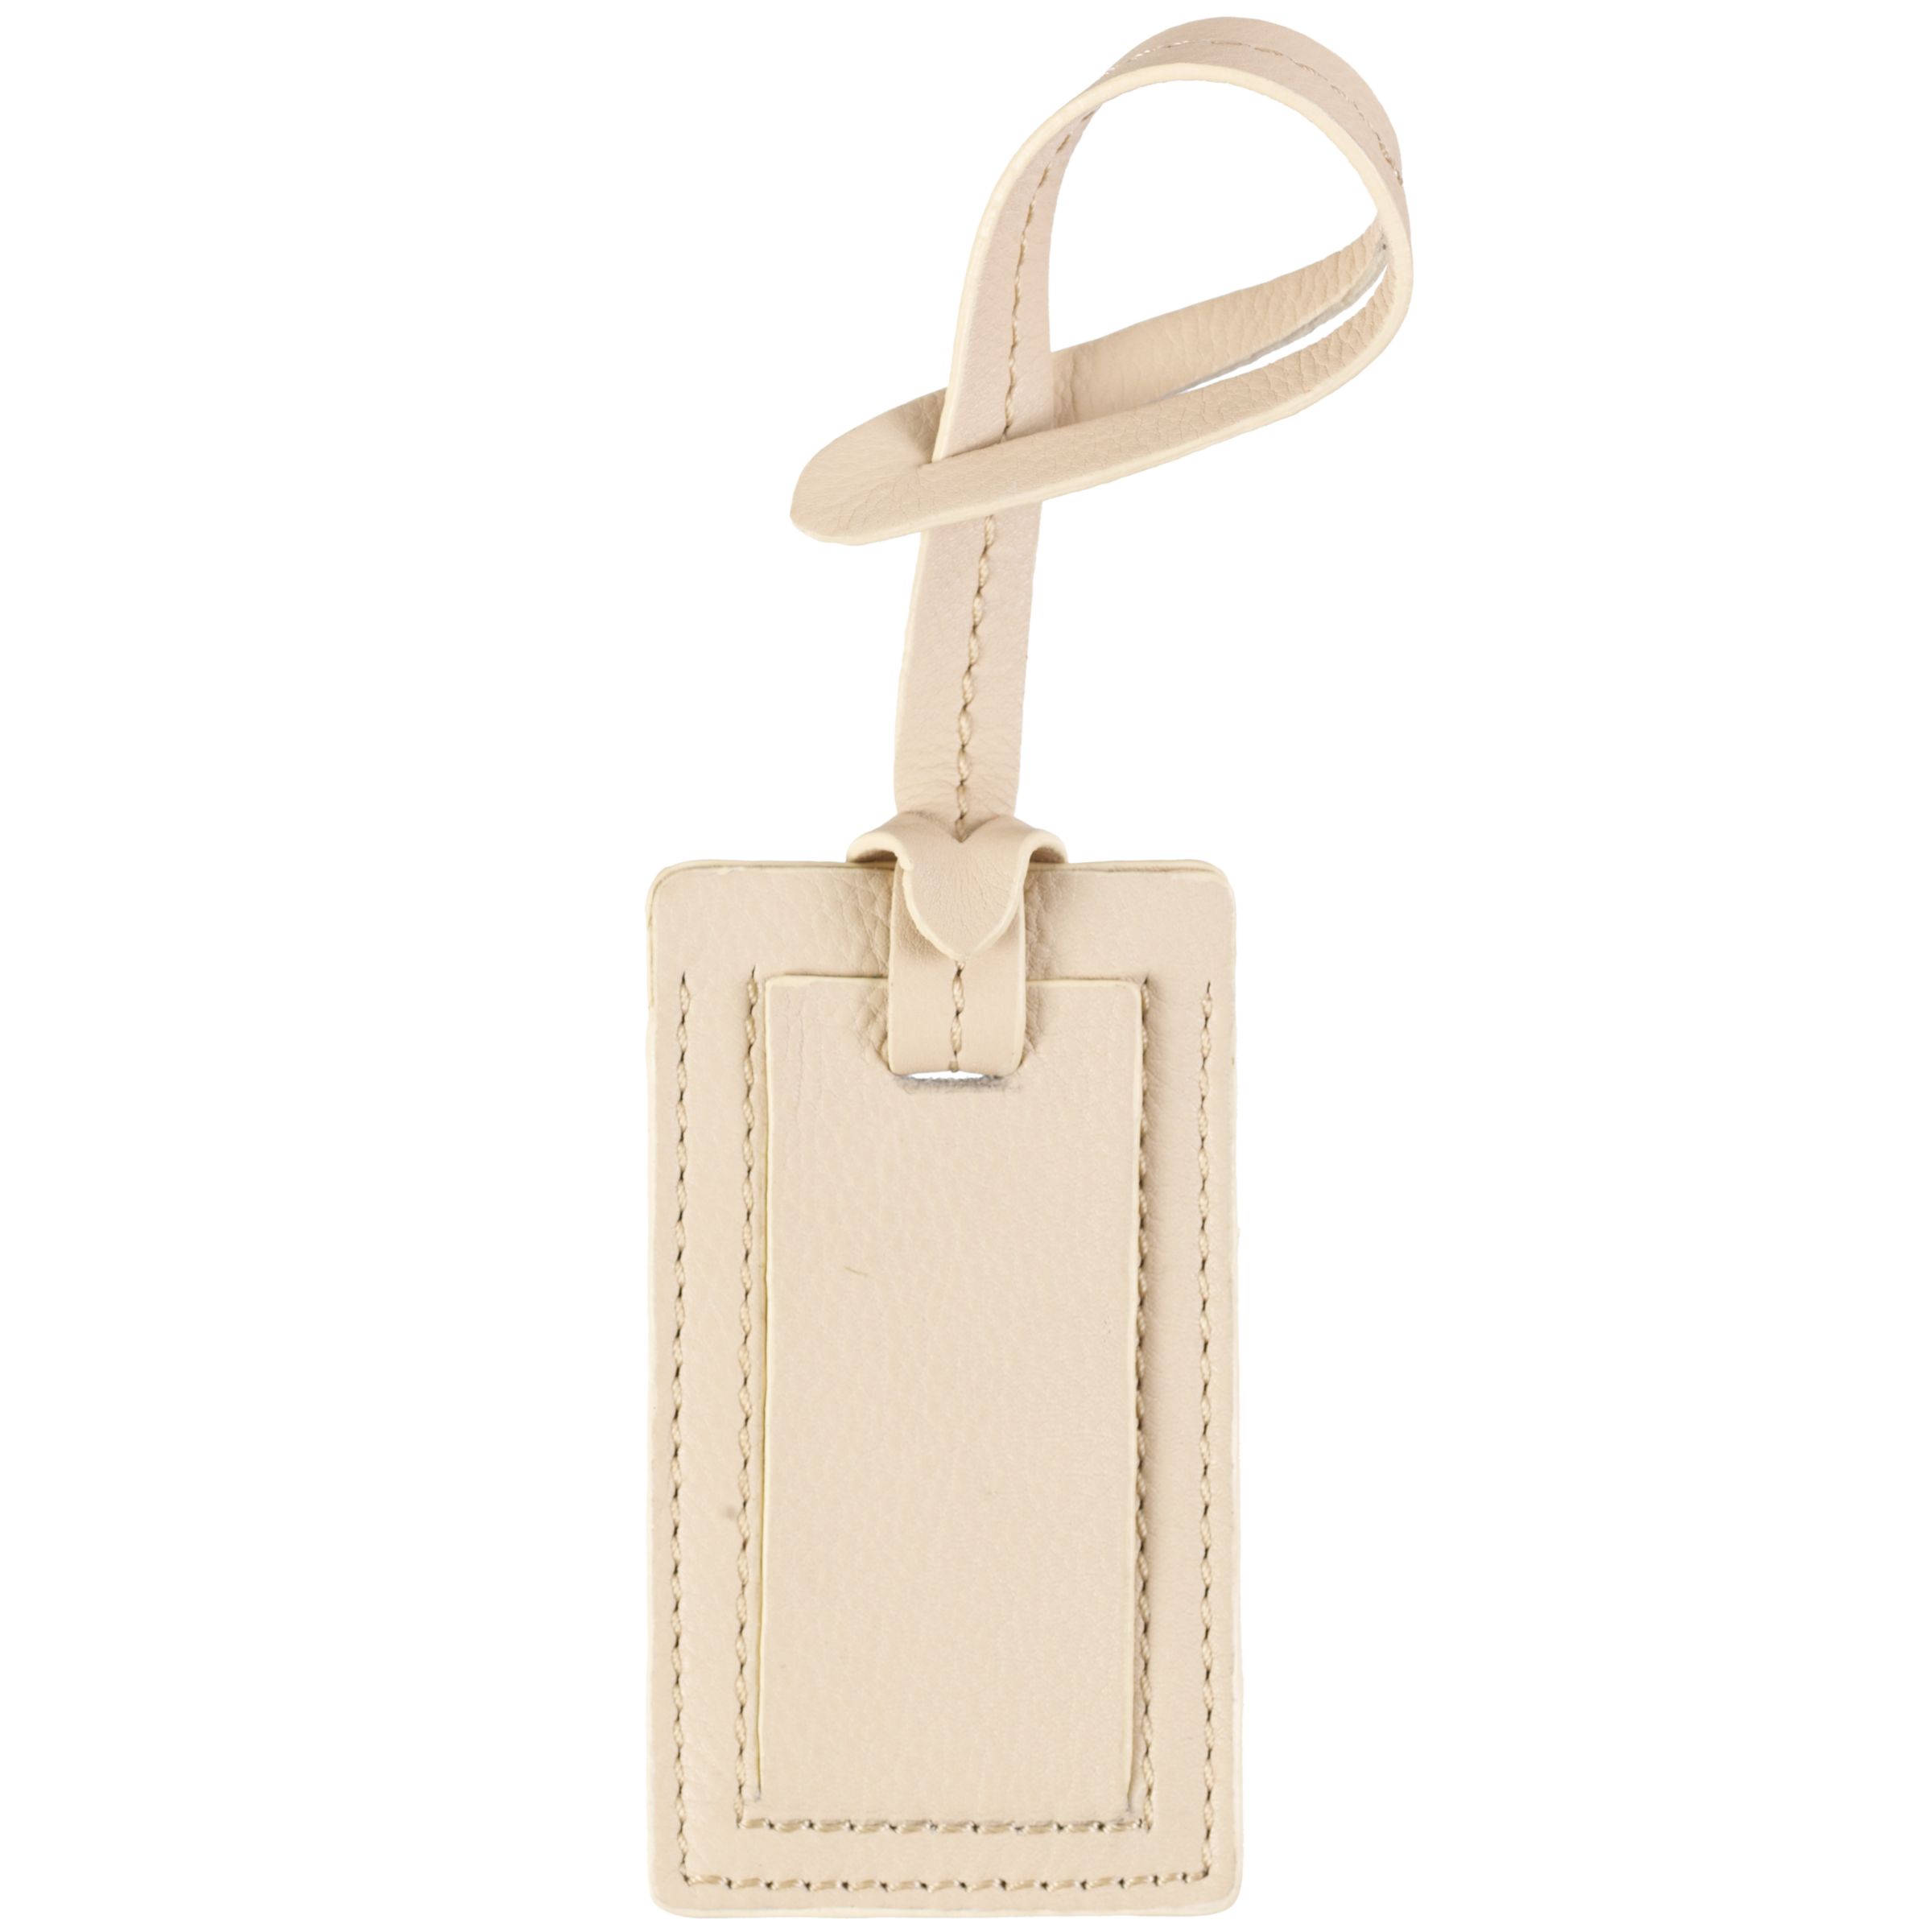 Osprey London The Mayes Leather Luggage Tag IvoryTravel in style!